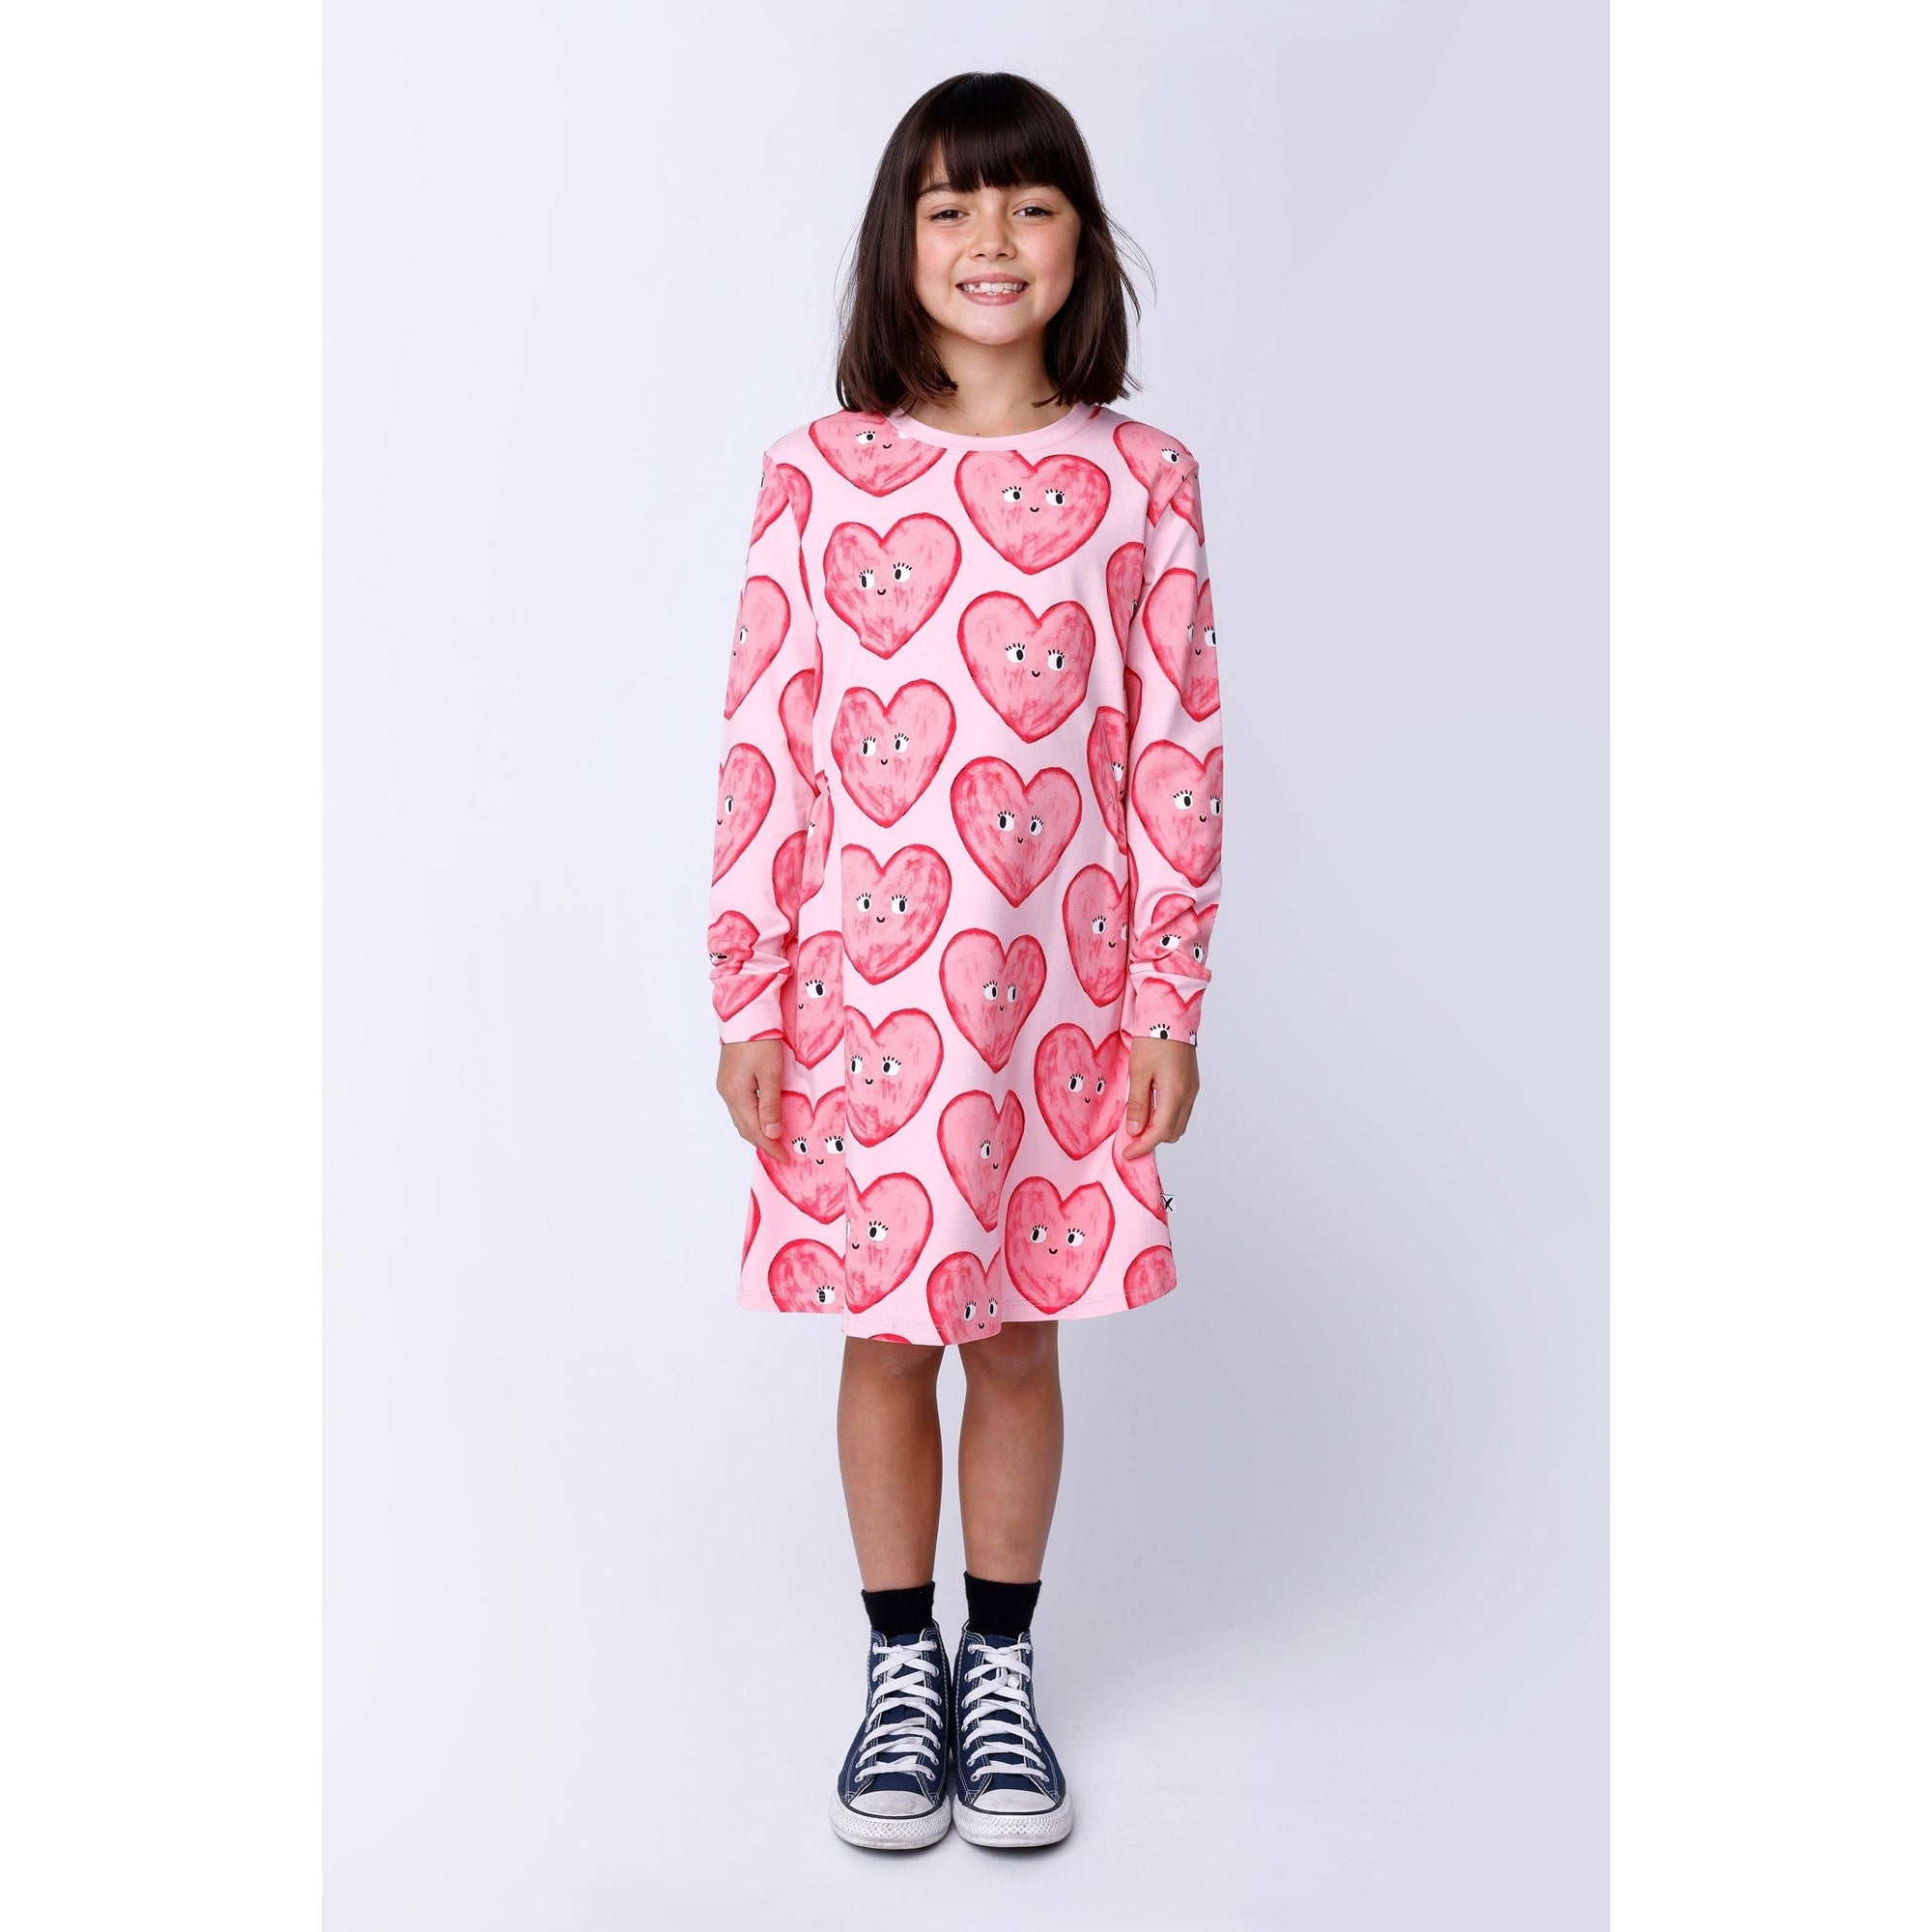 Painted Hearts Dress